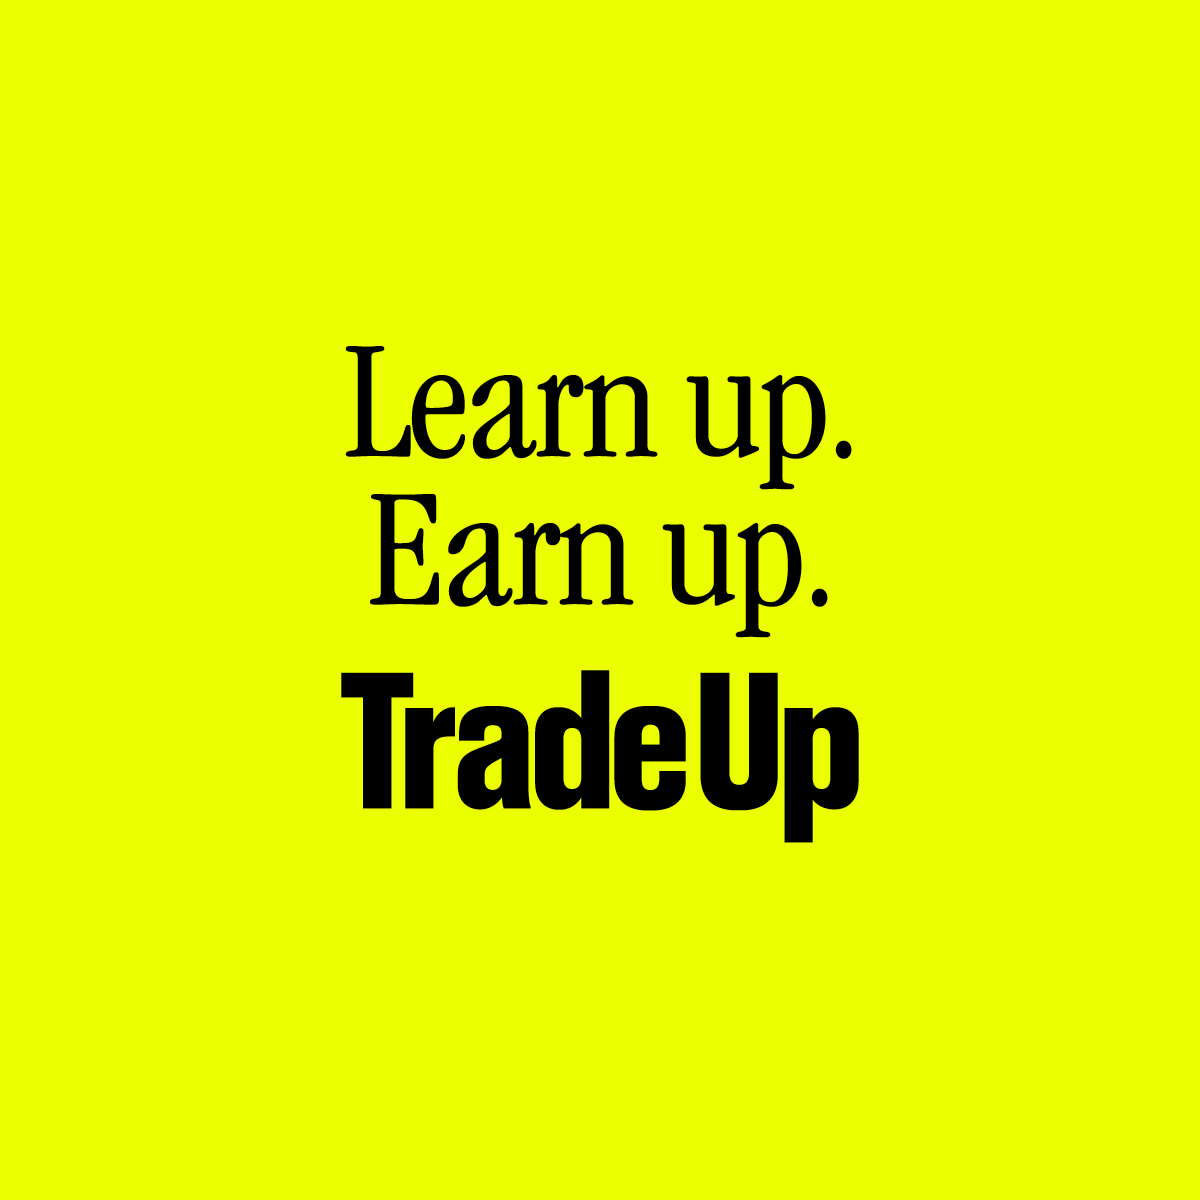 Learn up. Earn up. Trade up words